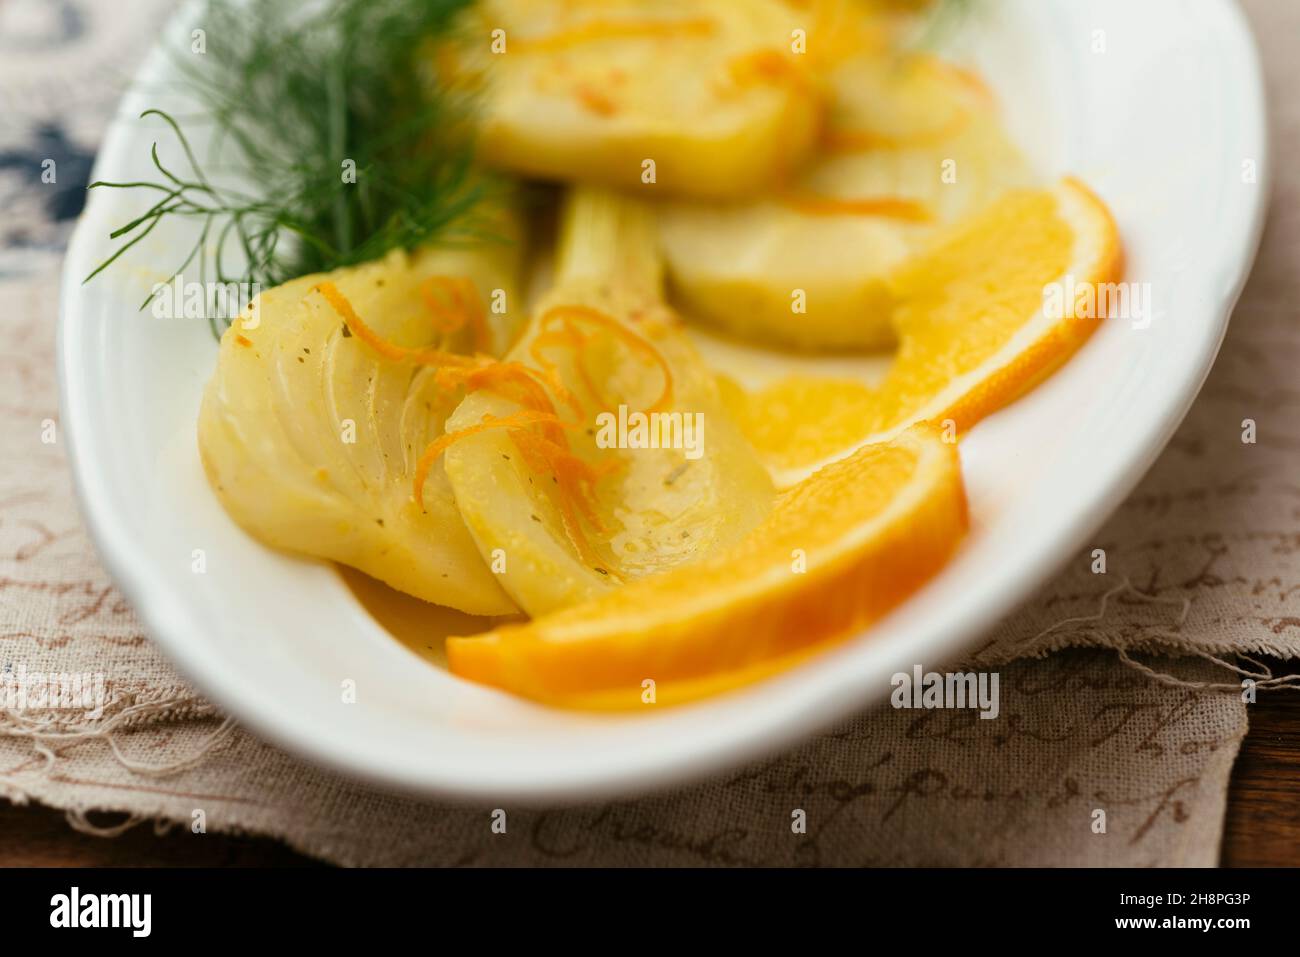 Home made orange braised fennel as side dish. Stock Photo